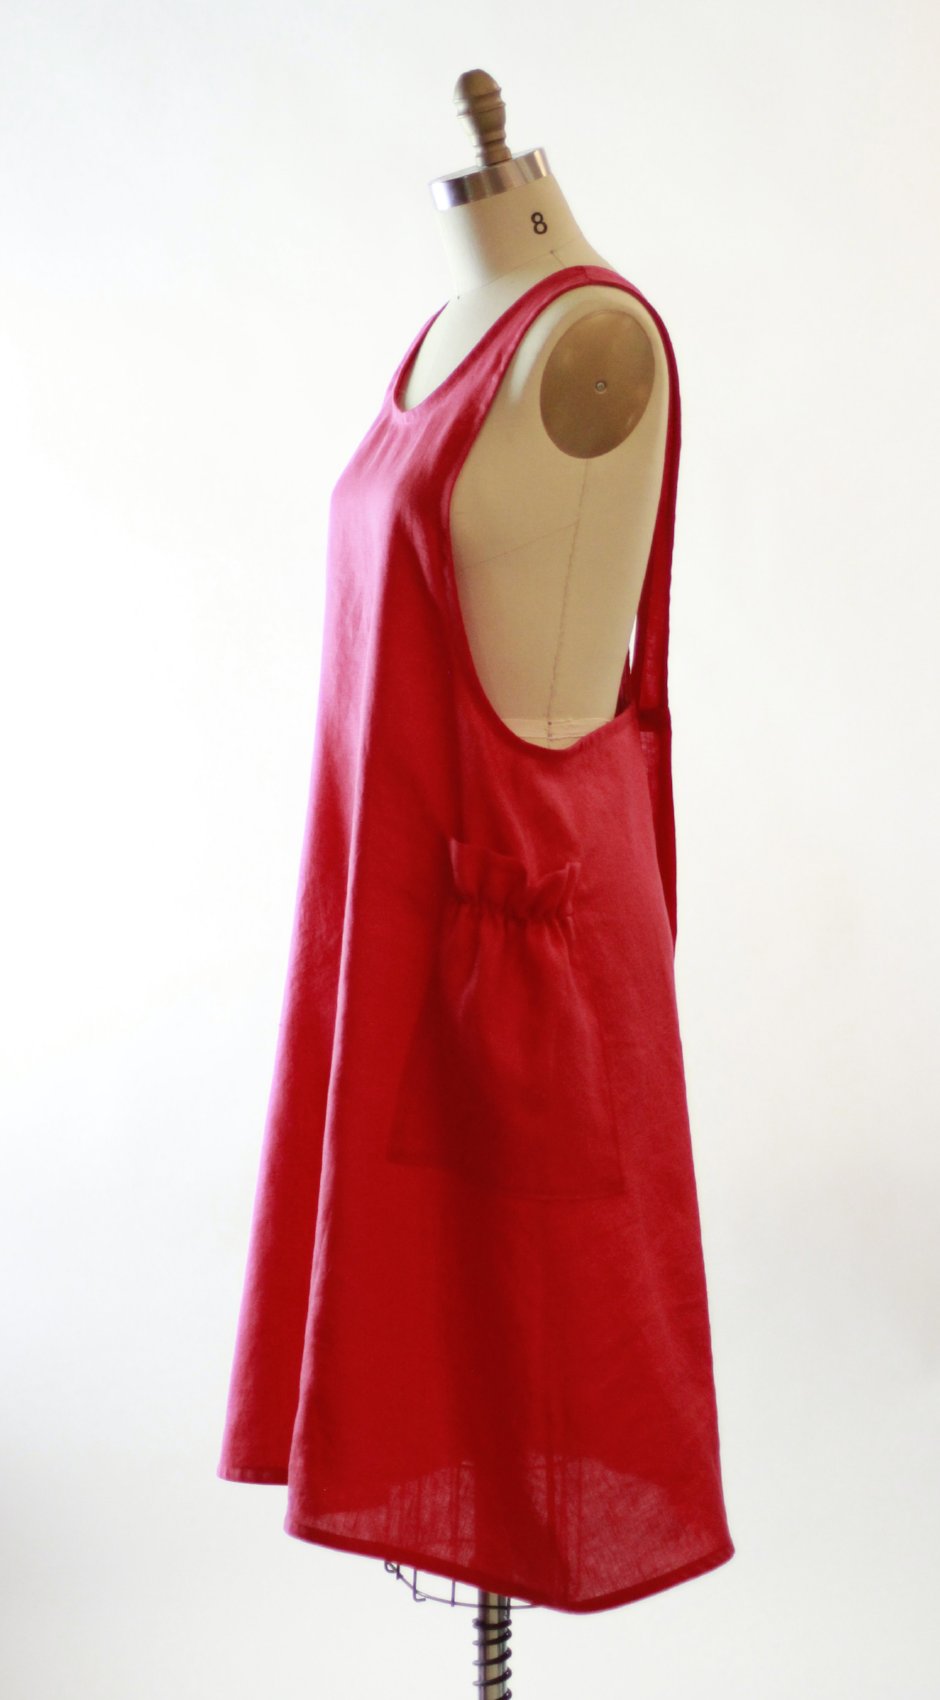 No Tie Crossback Apron in Red 100% Flax Linen XS-5X, side view